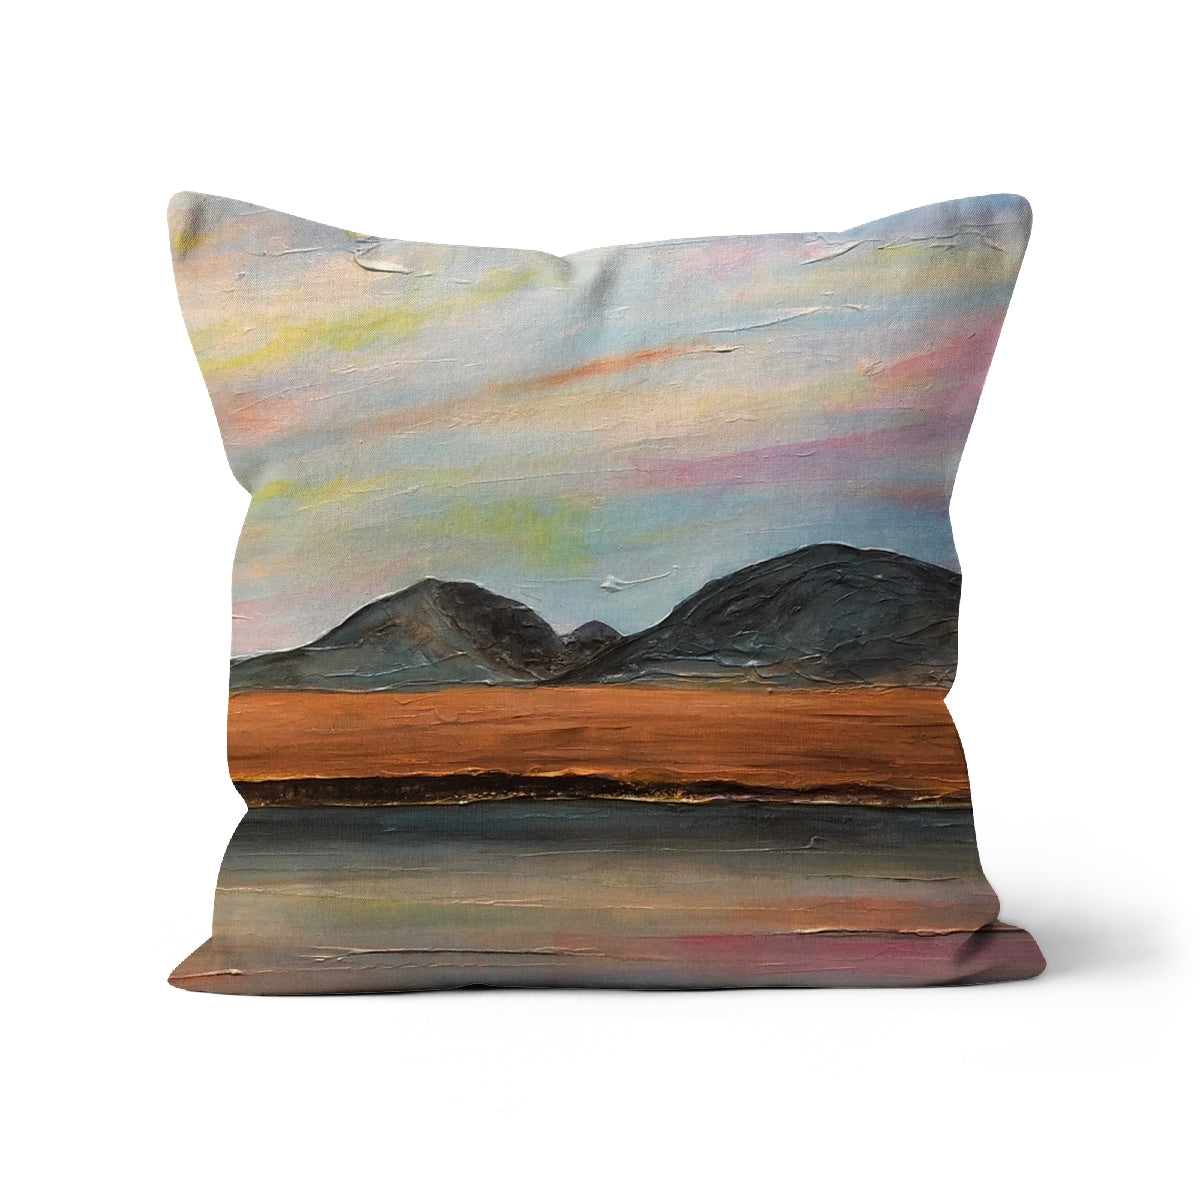 Jura Dawn Art Gifts Cushion-Cushions-Hebridean Islands Art Gallery-Faux Suede-24"x24"-Paintings, Prints, Homeware, Art Gifts From Scotland By Scottish Artist Kevin Hunter